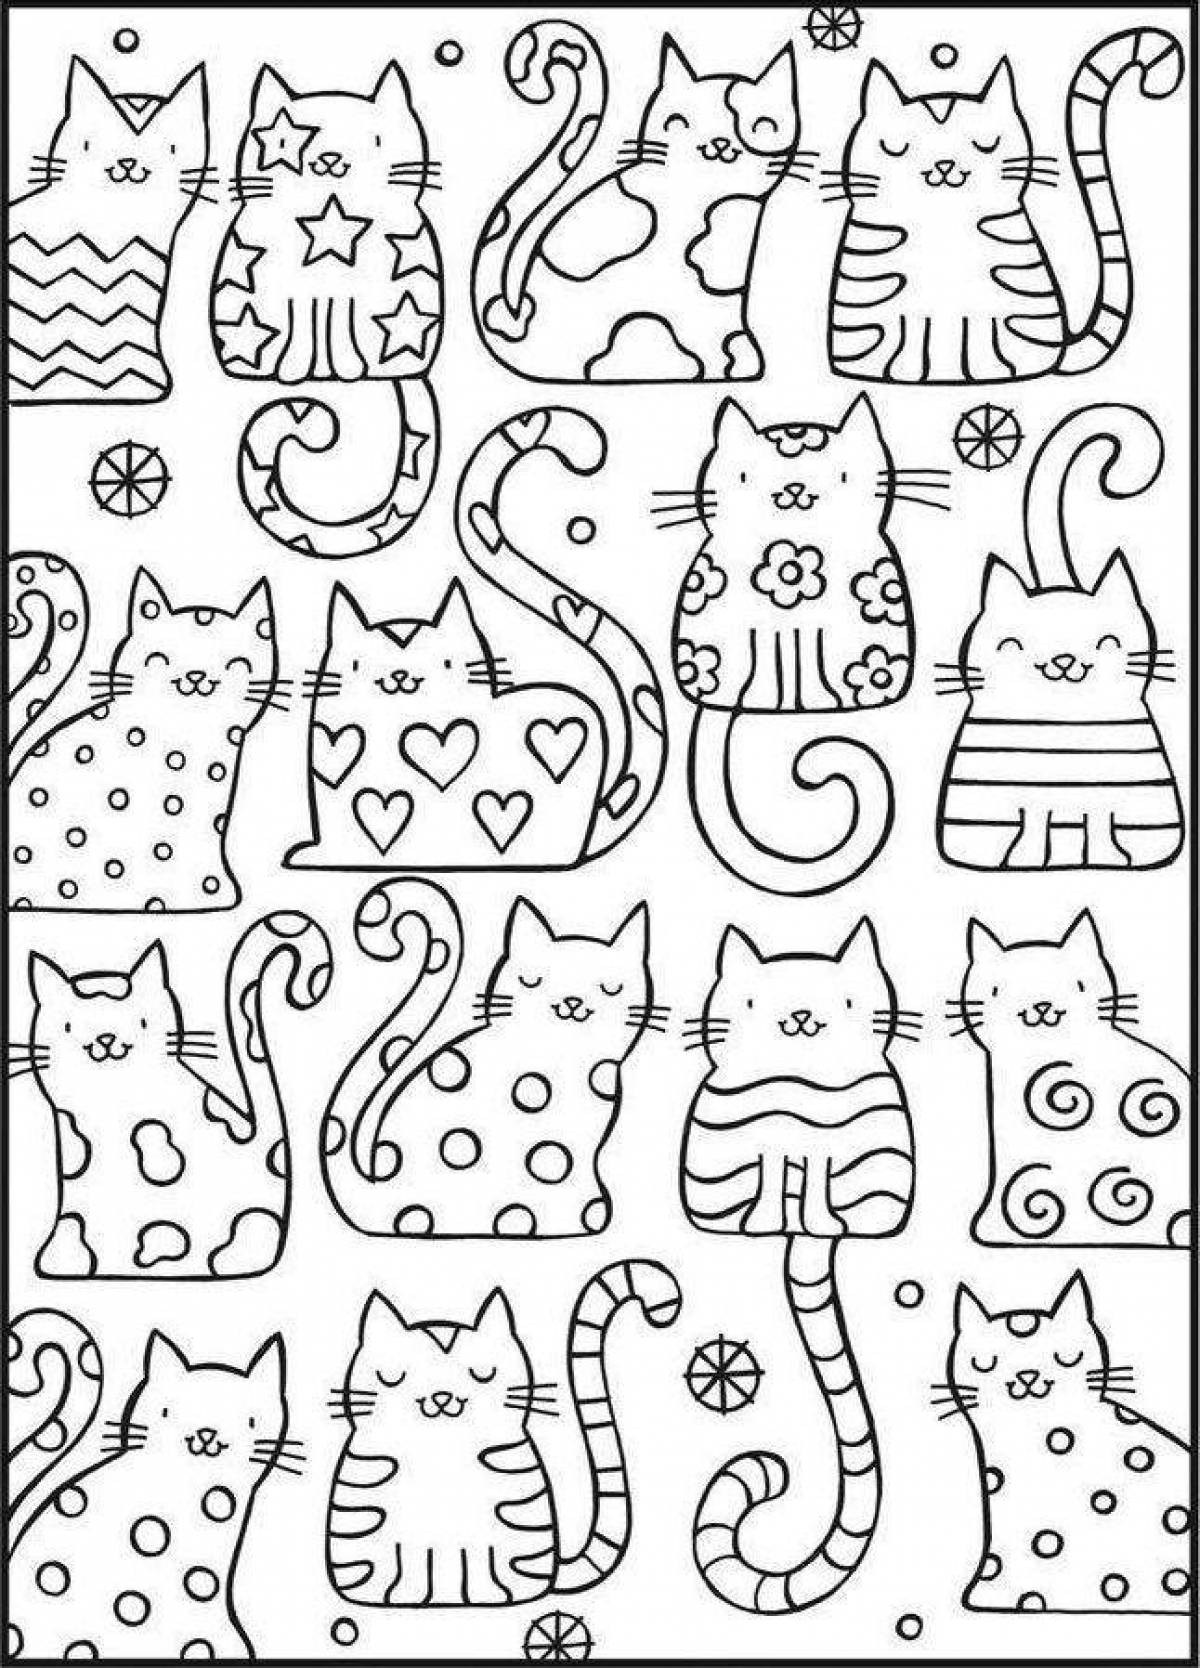 Coloring funny kittens